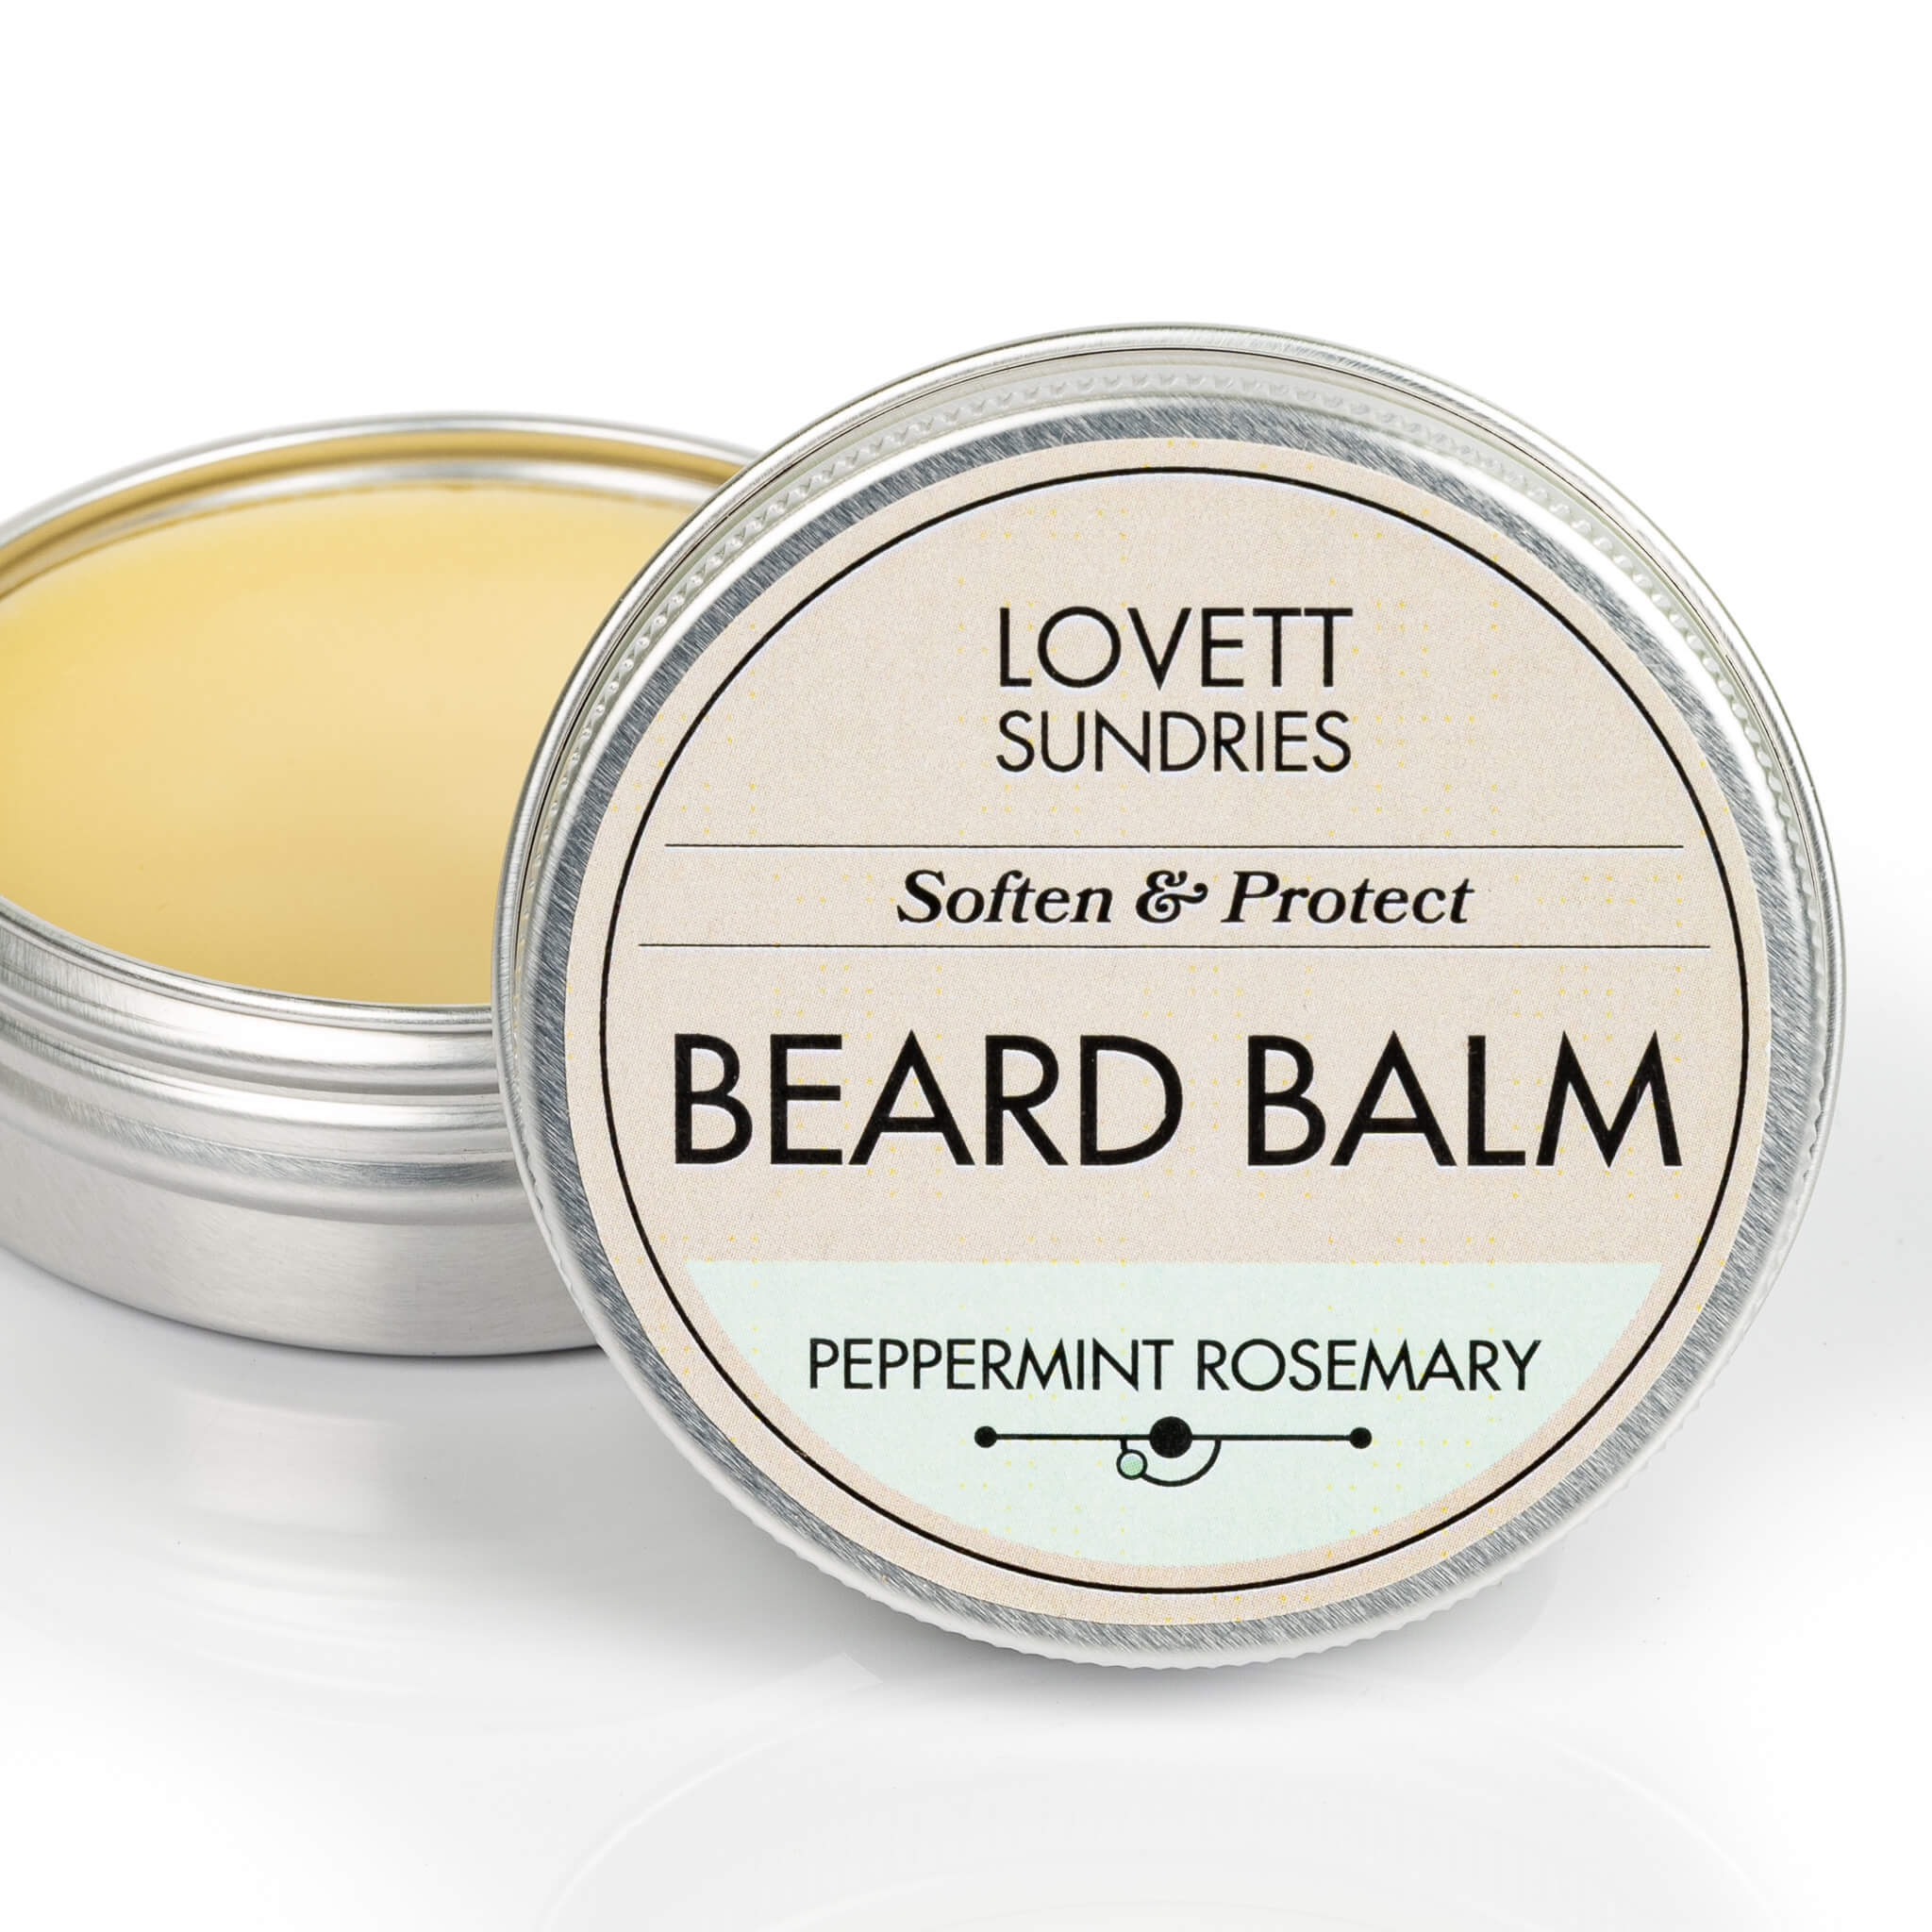 Tin of all natural conditioning and styling peppermint rosemary scented beard balm.